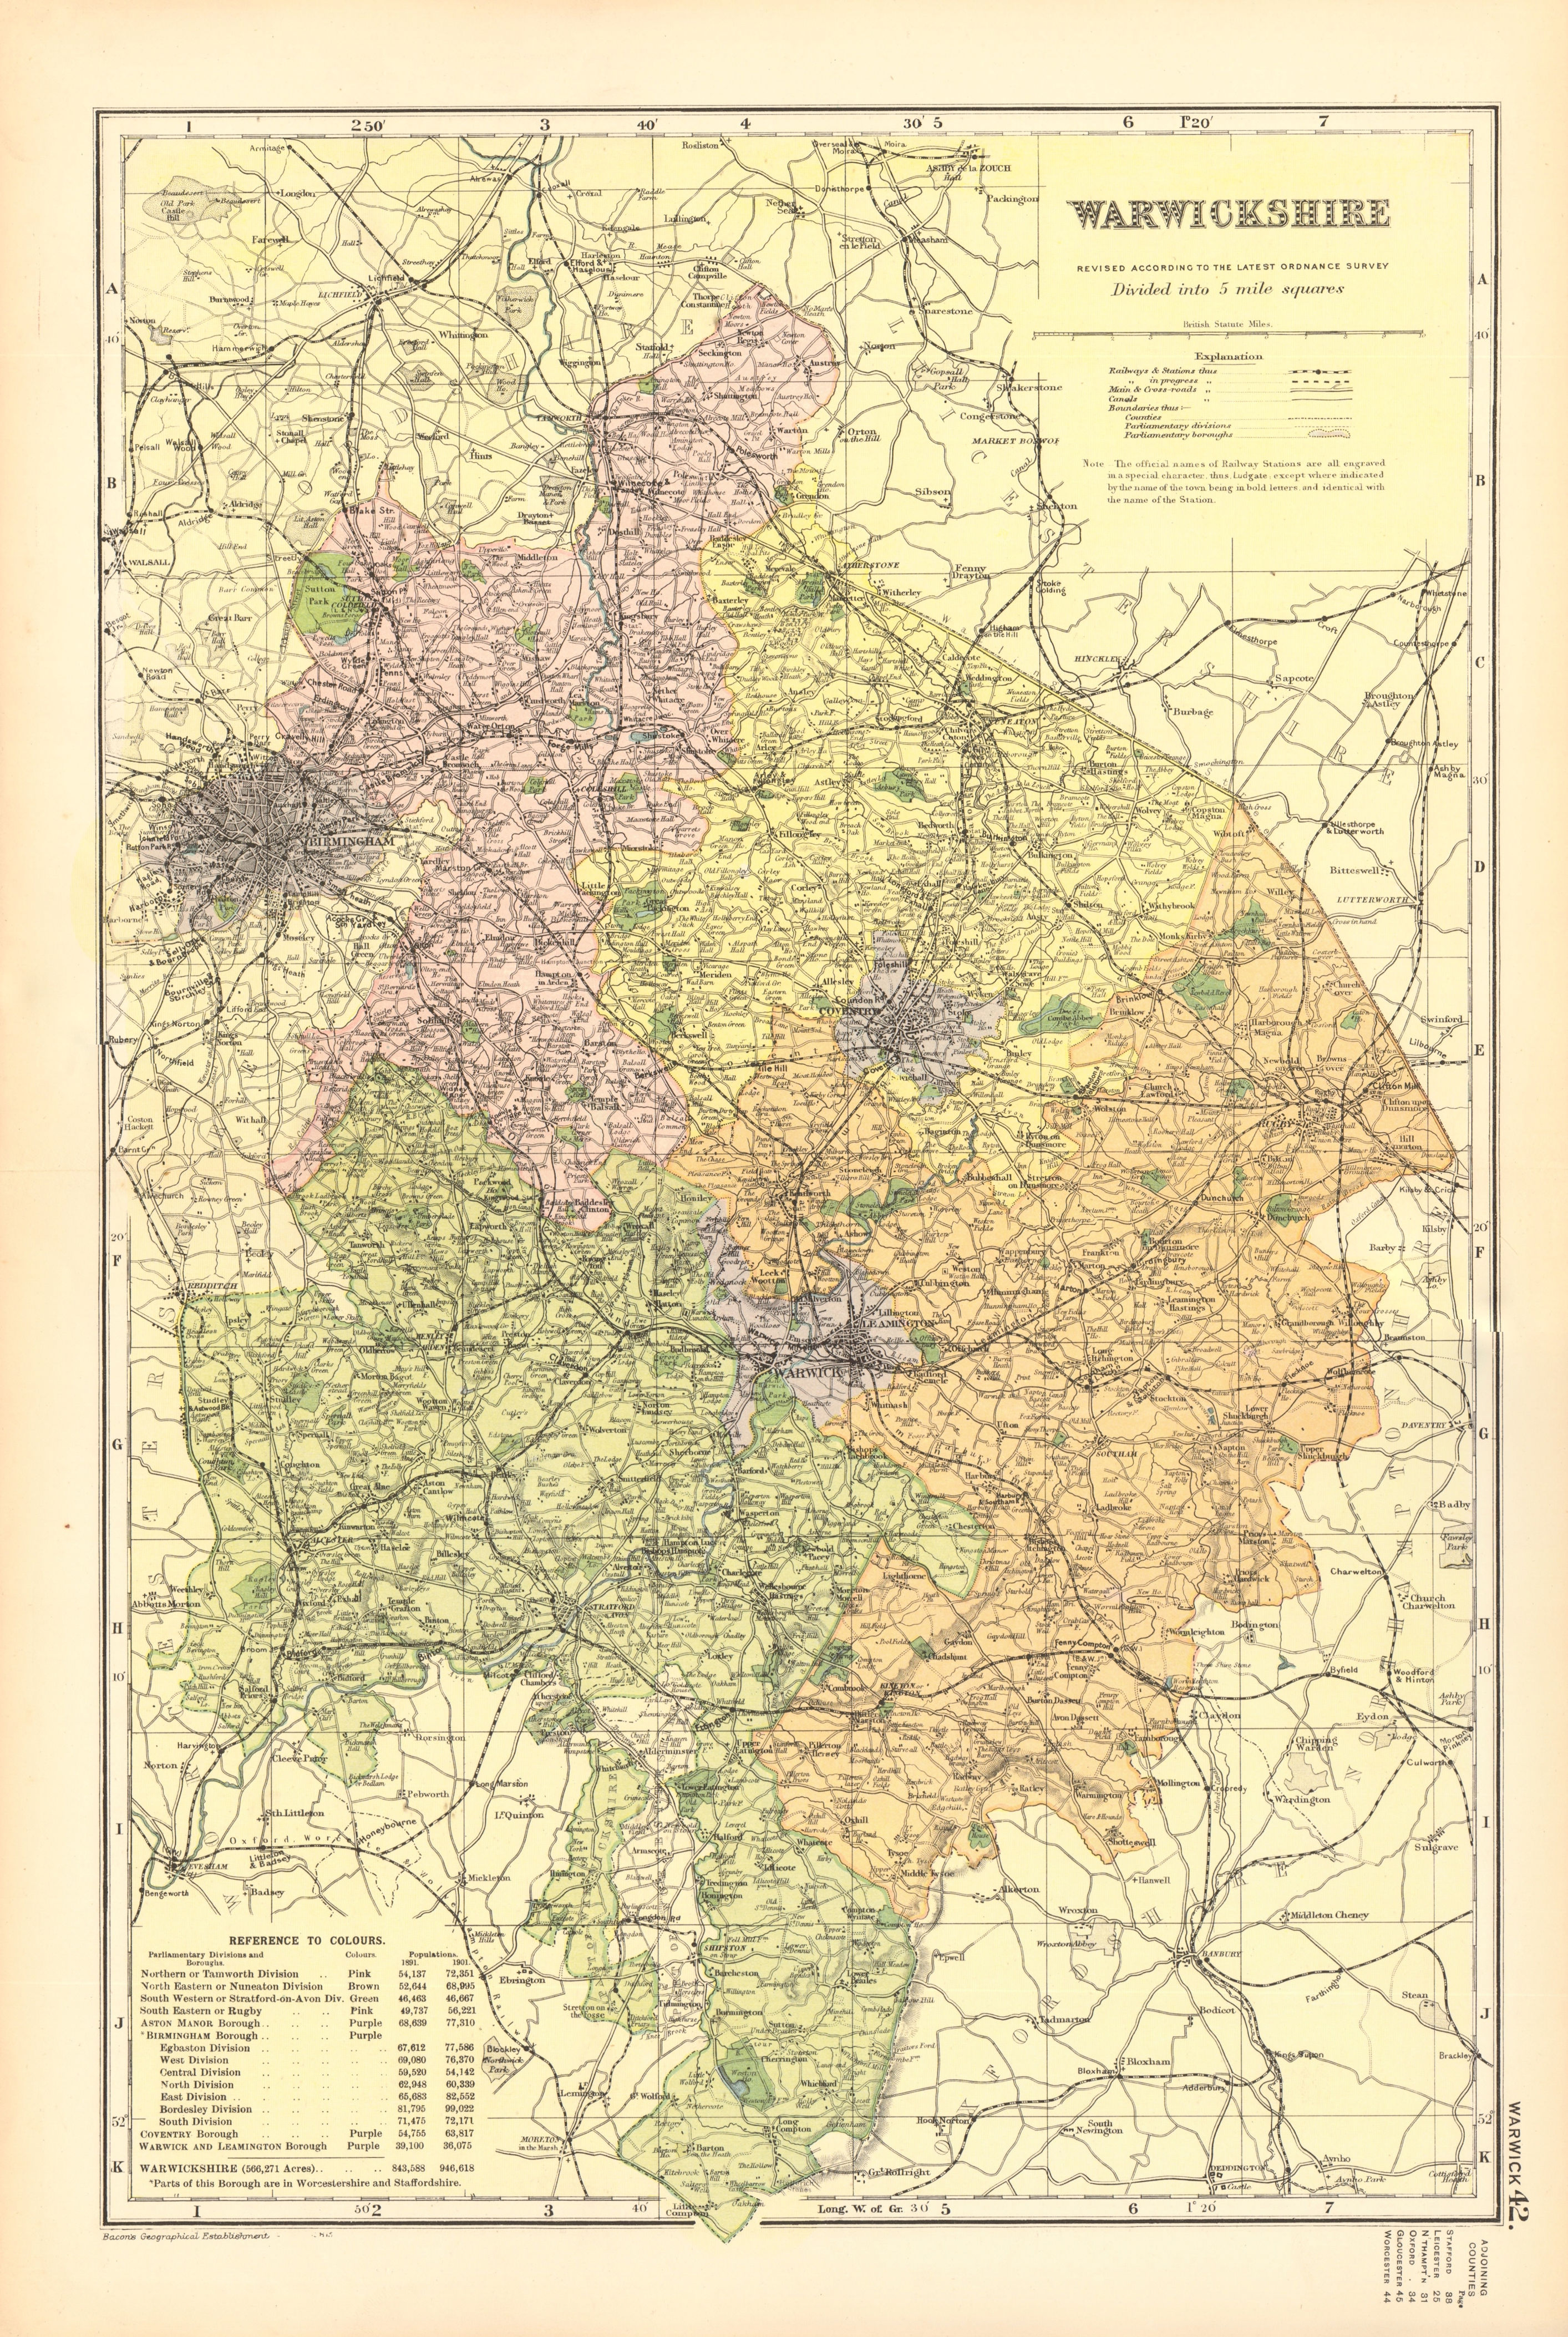 Associate Product WARWICKSHIRE. Showing Parliamentary divisions, boroughs & parks. BACON 1904 map